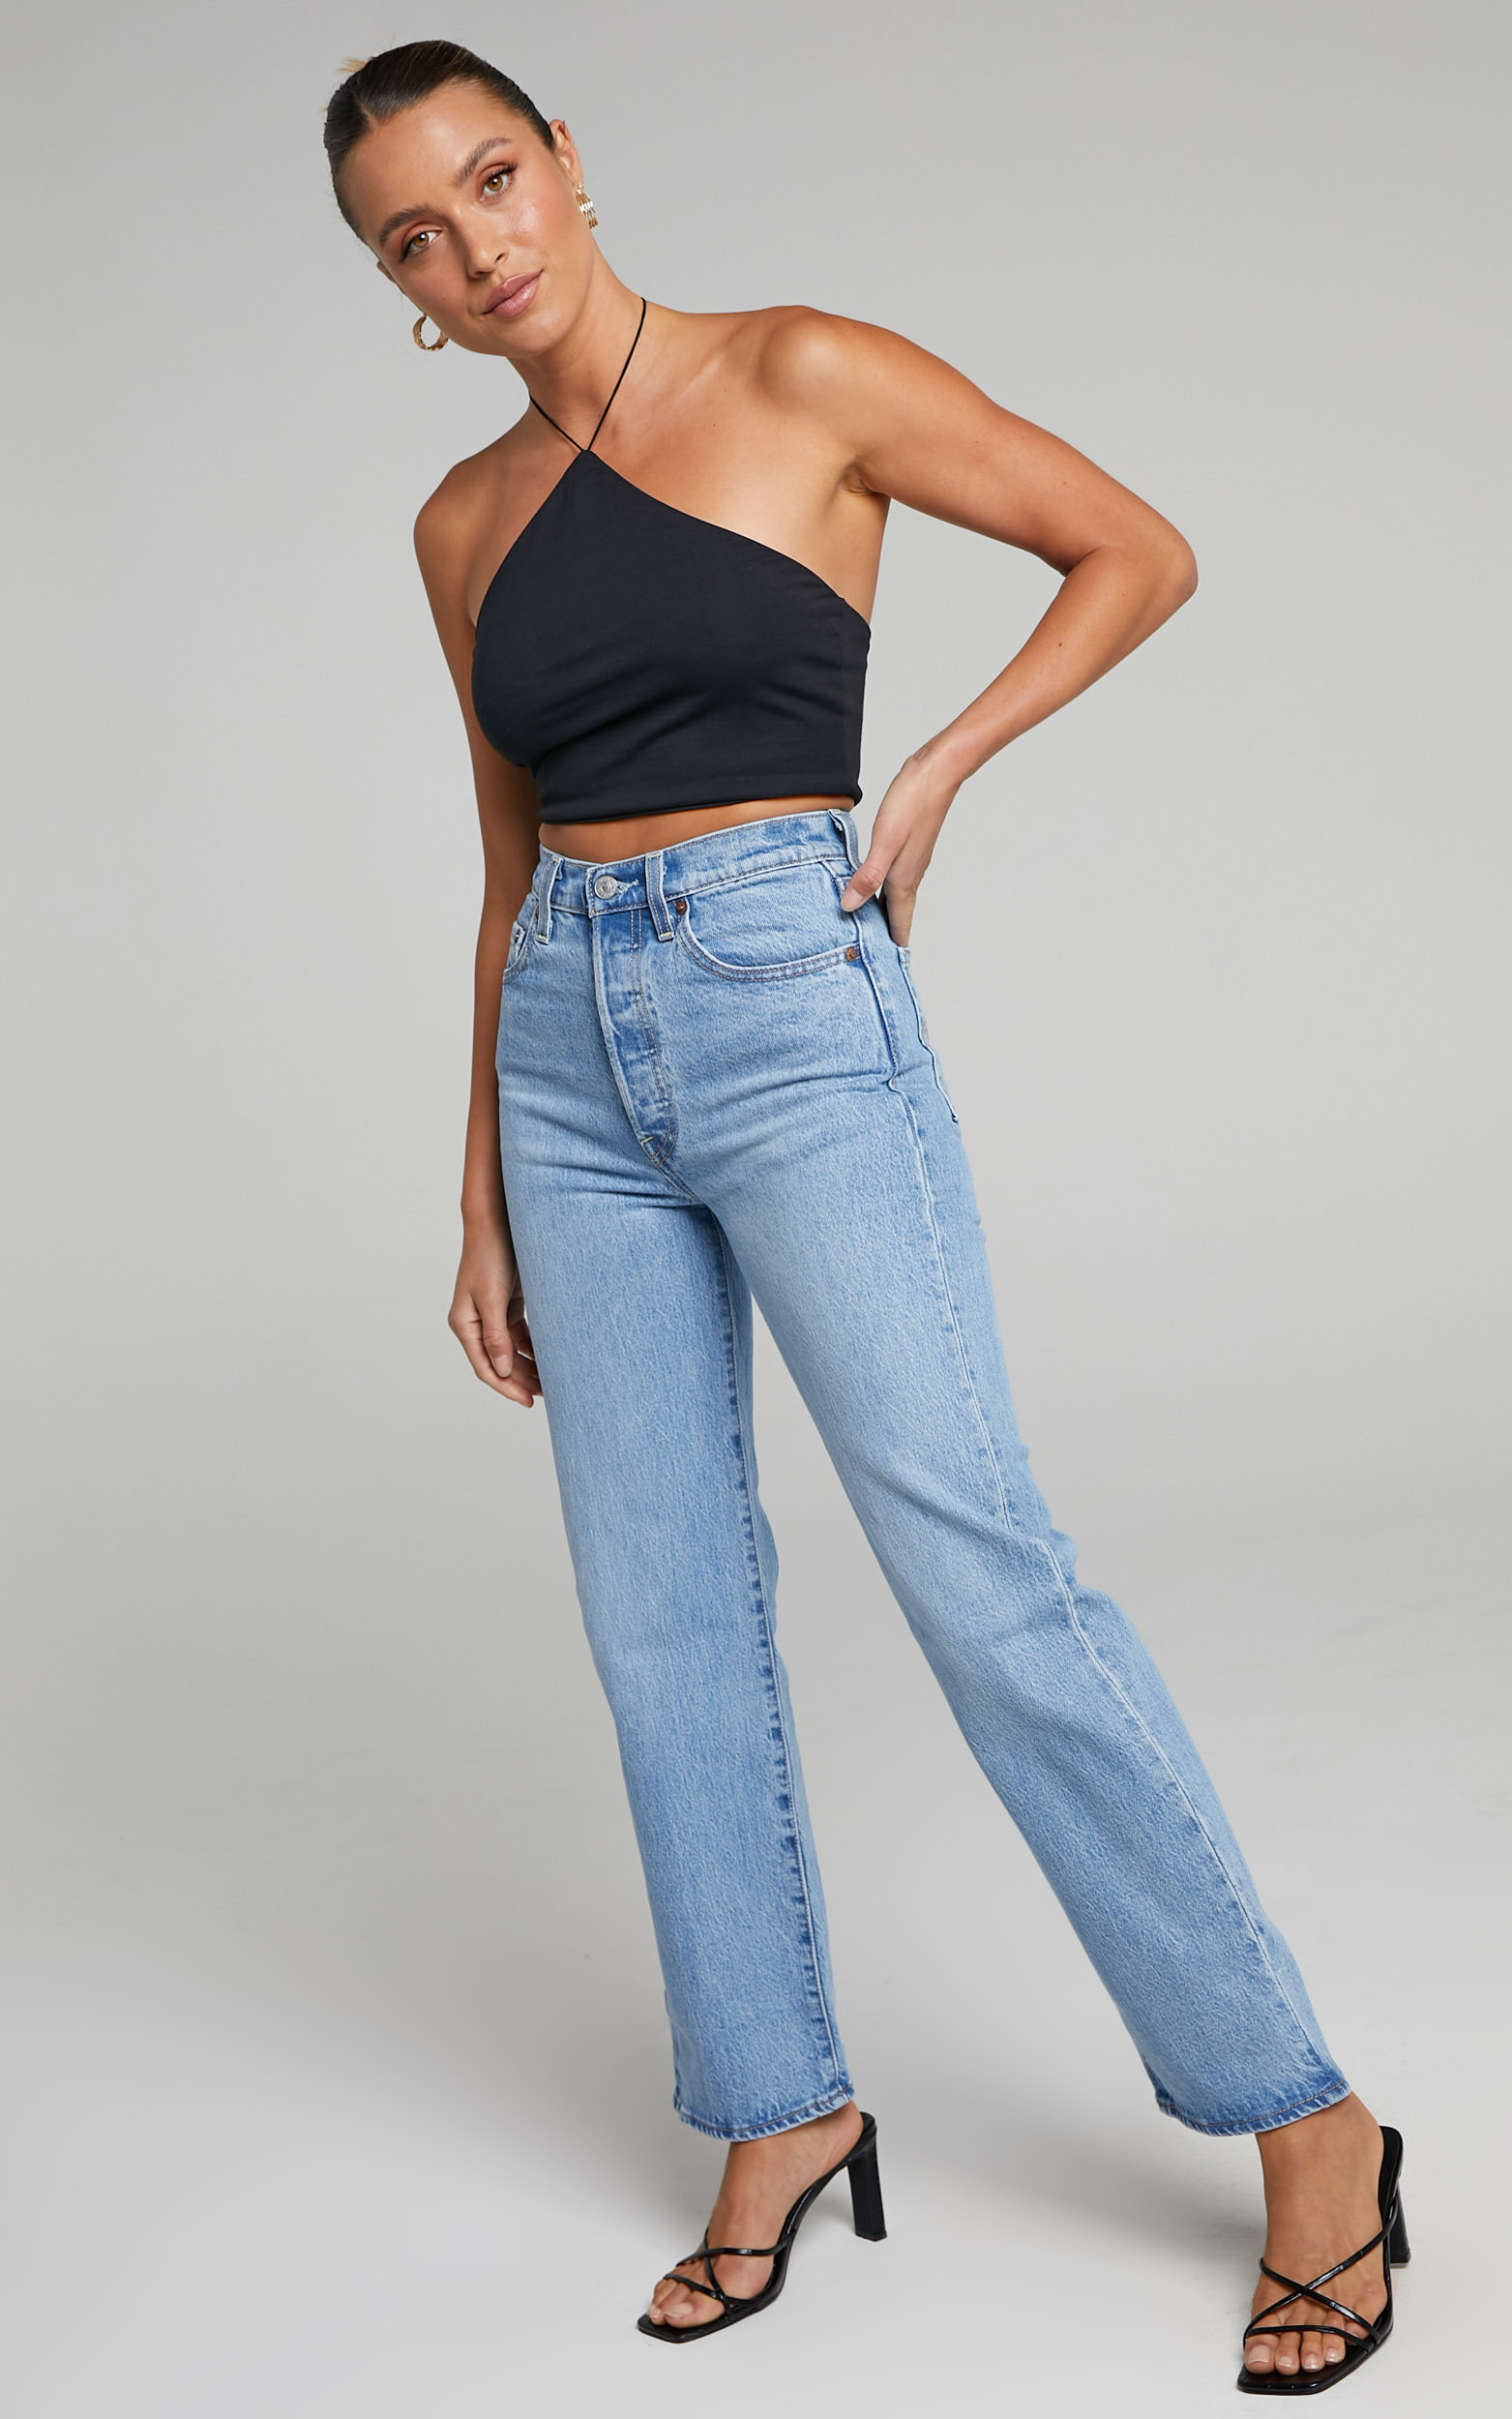 Levi's - Ribcage Straight Jean in Tango Gossip - 06, BLU1, hi-res image number null